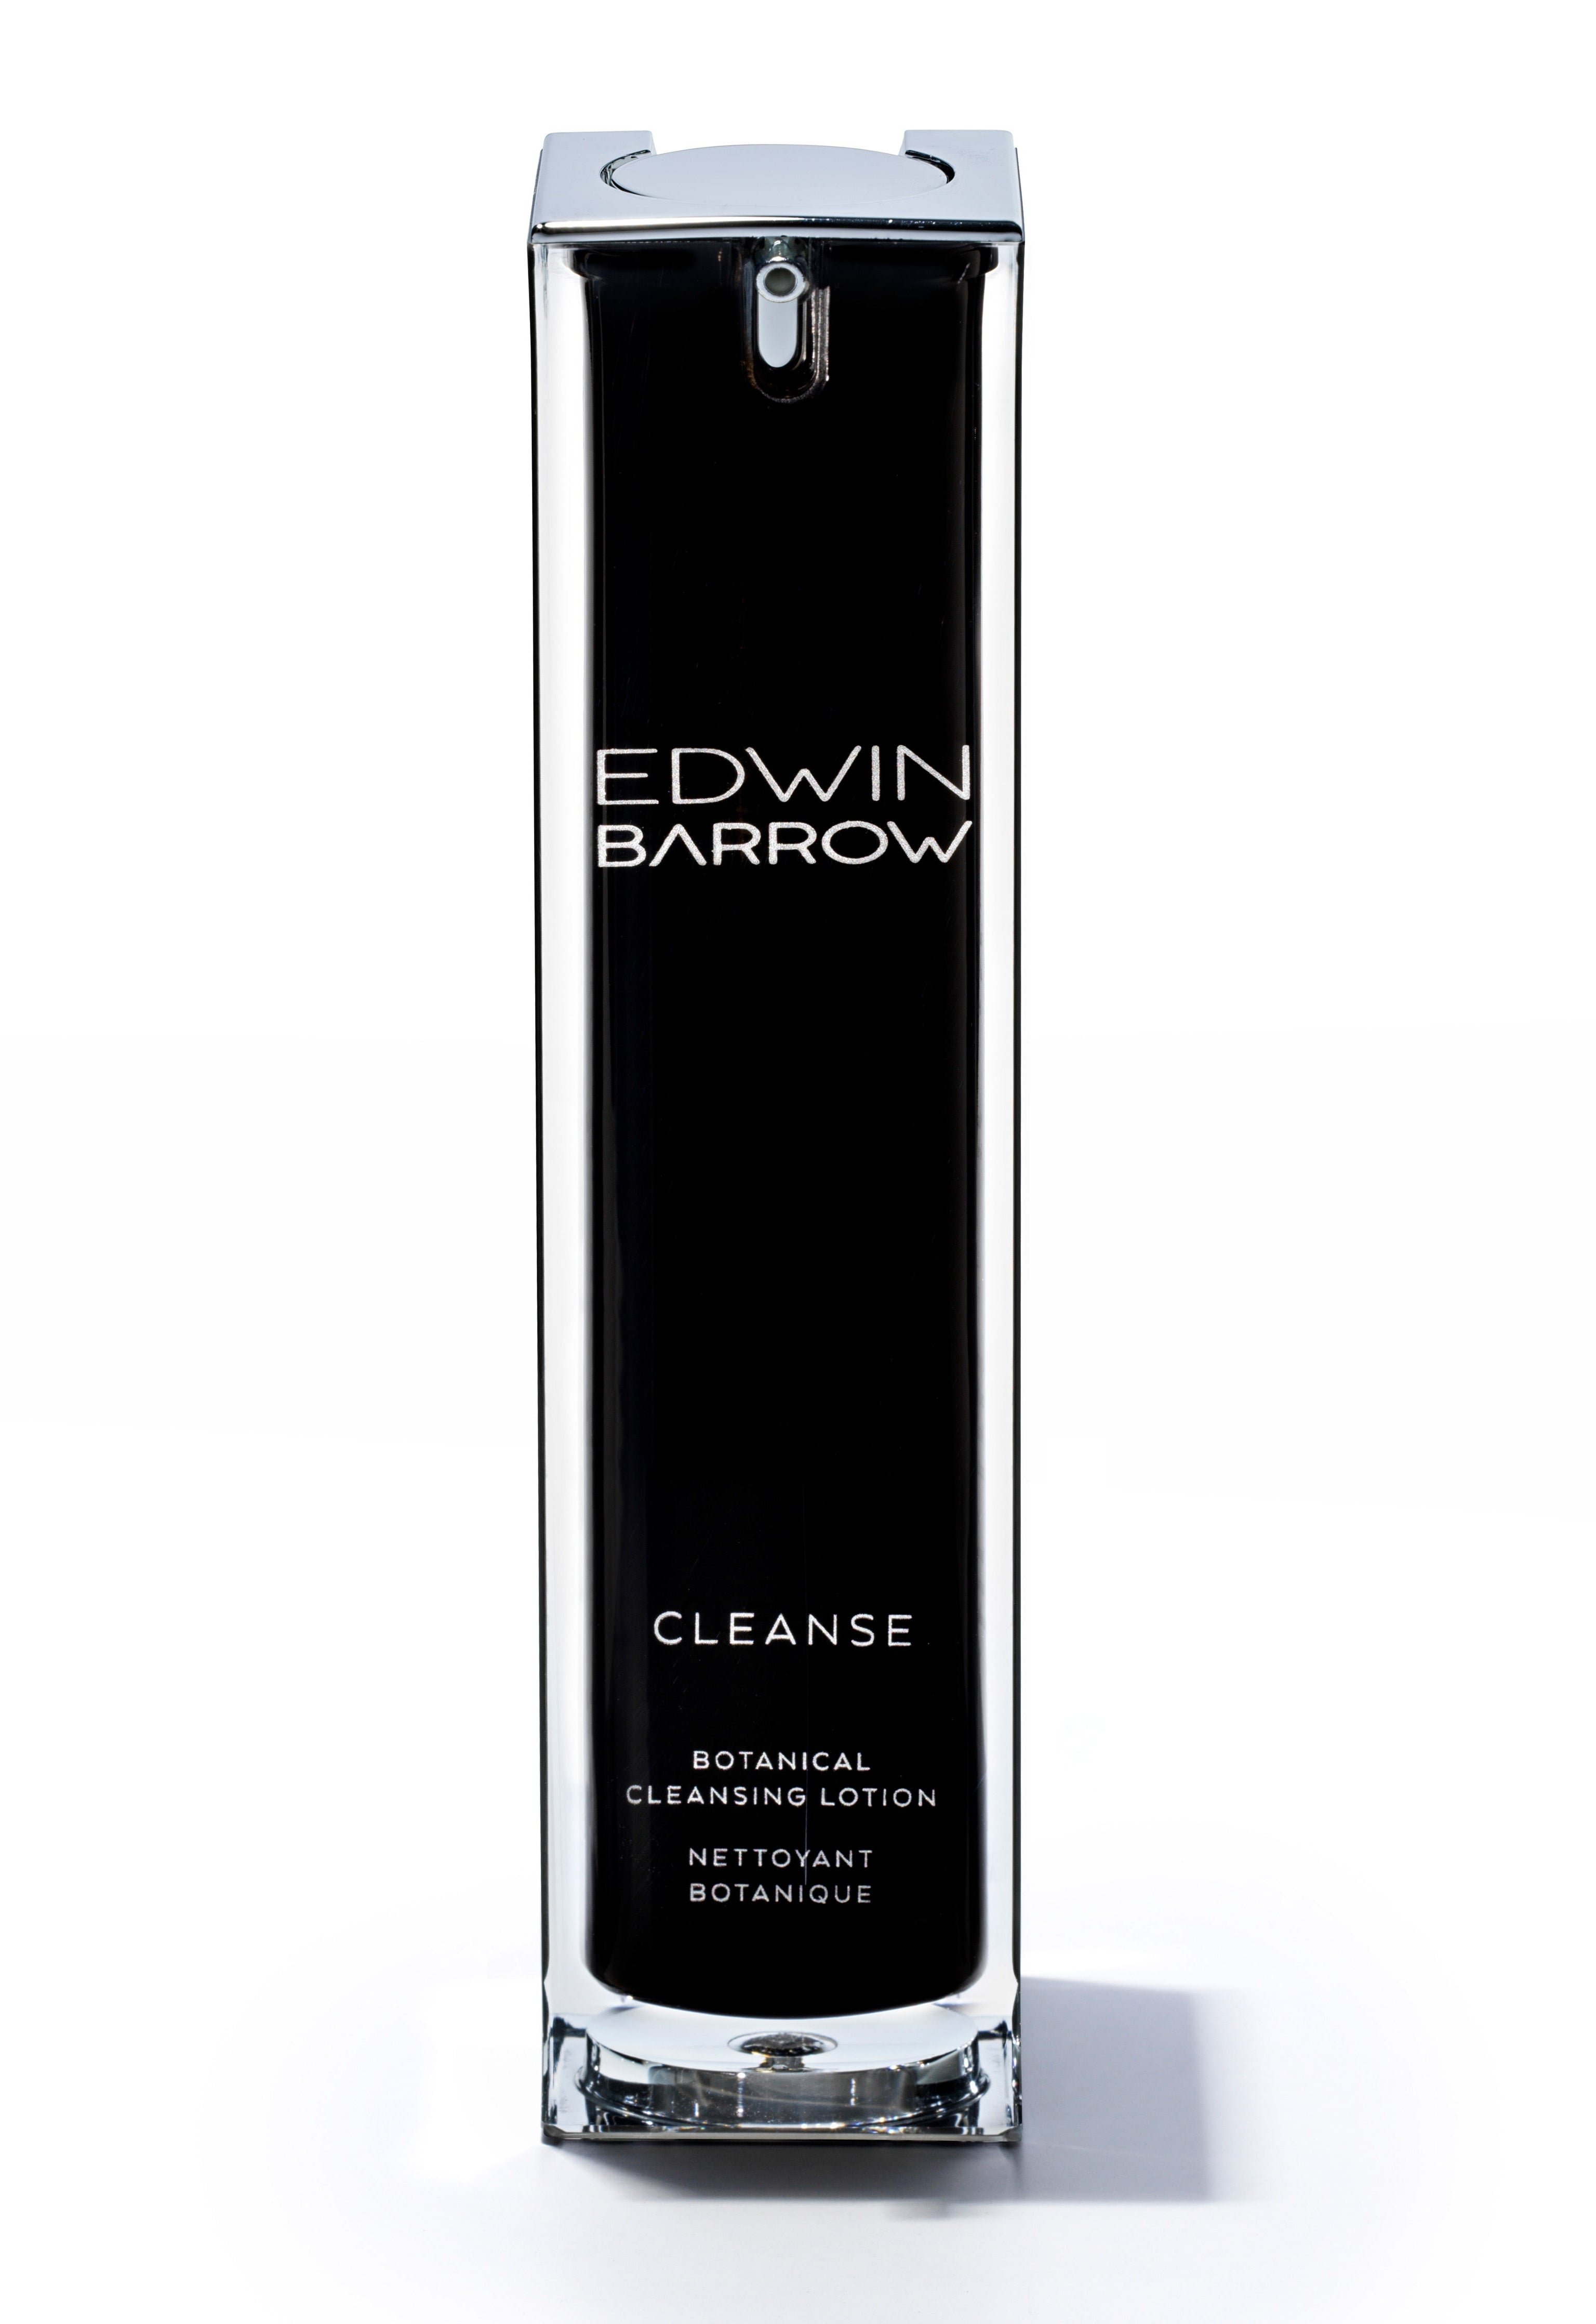 Cleanse - Botanical Cleansing Lotion EDWIN BARROW